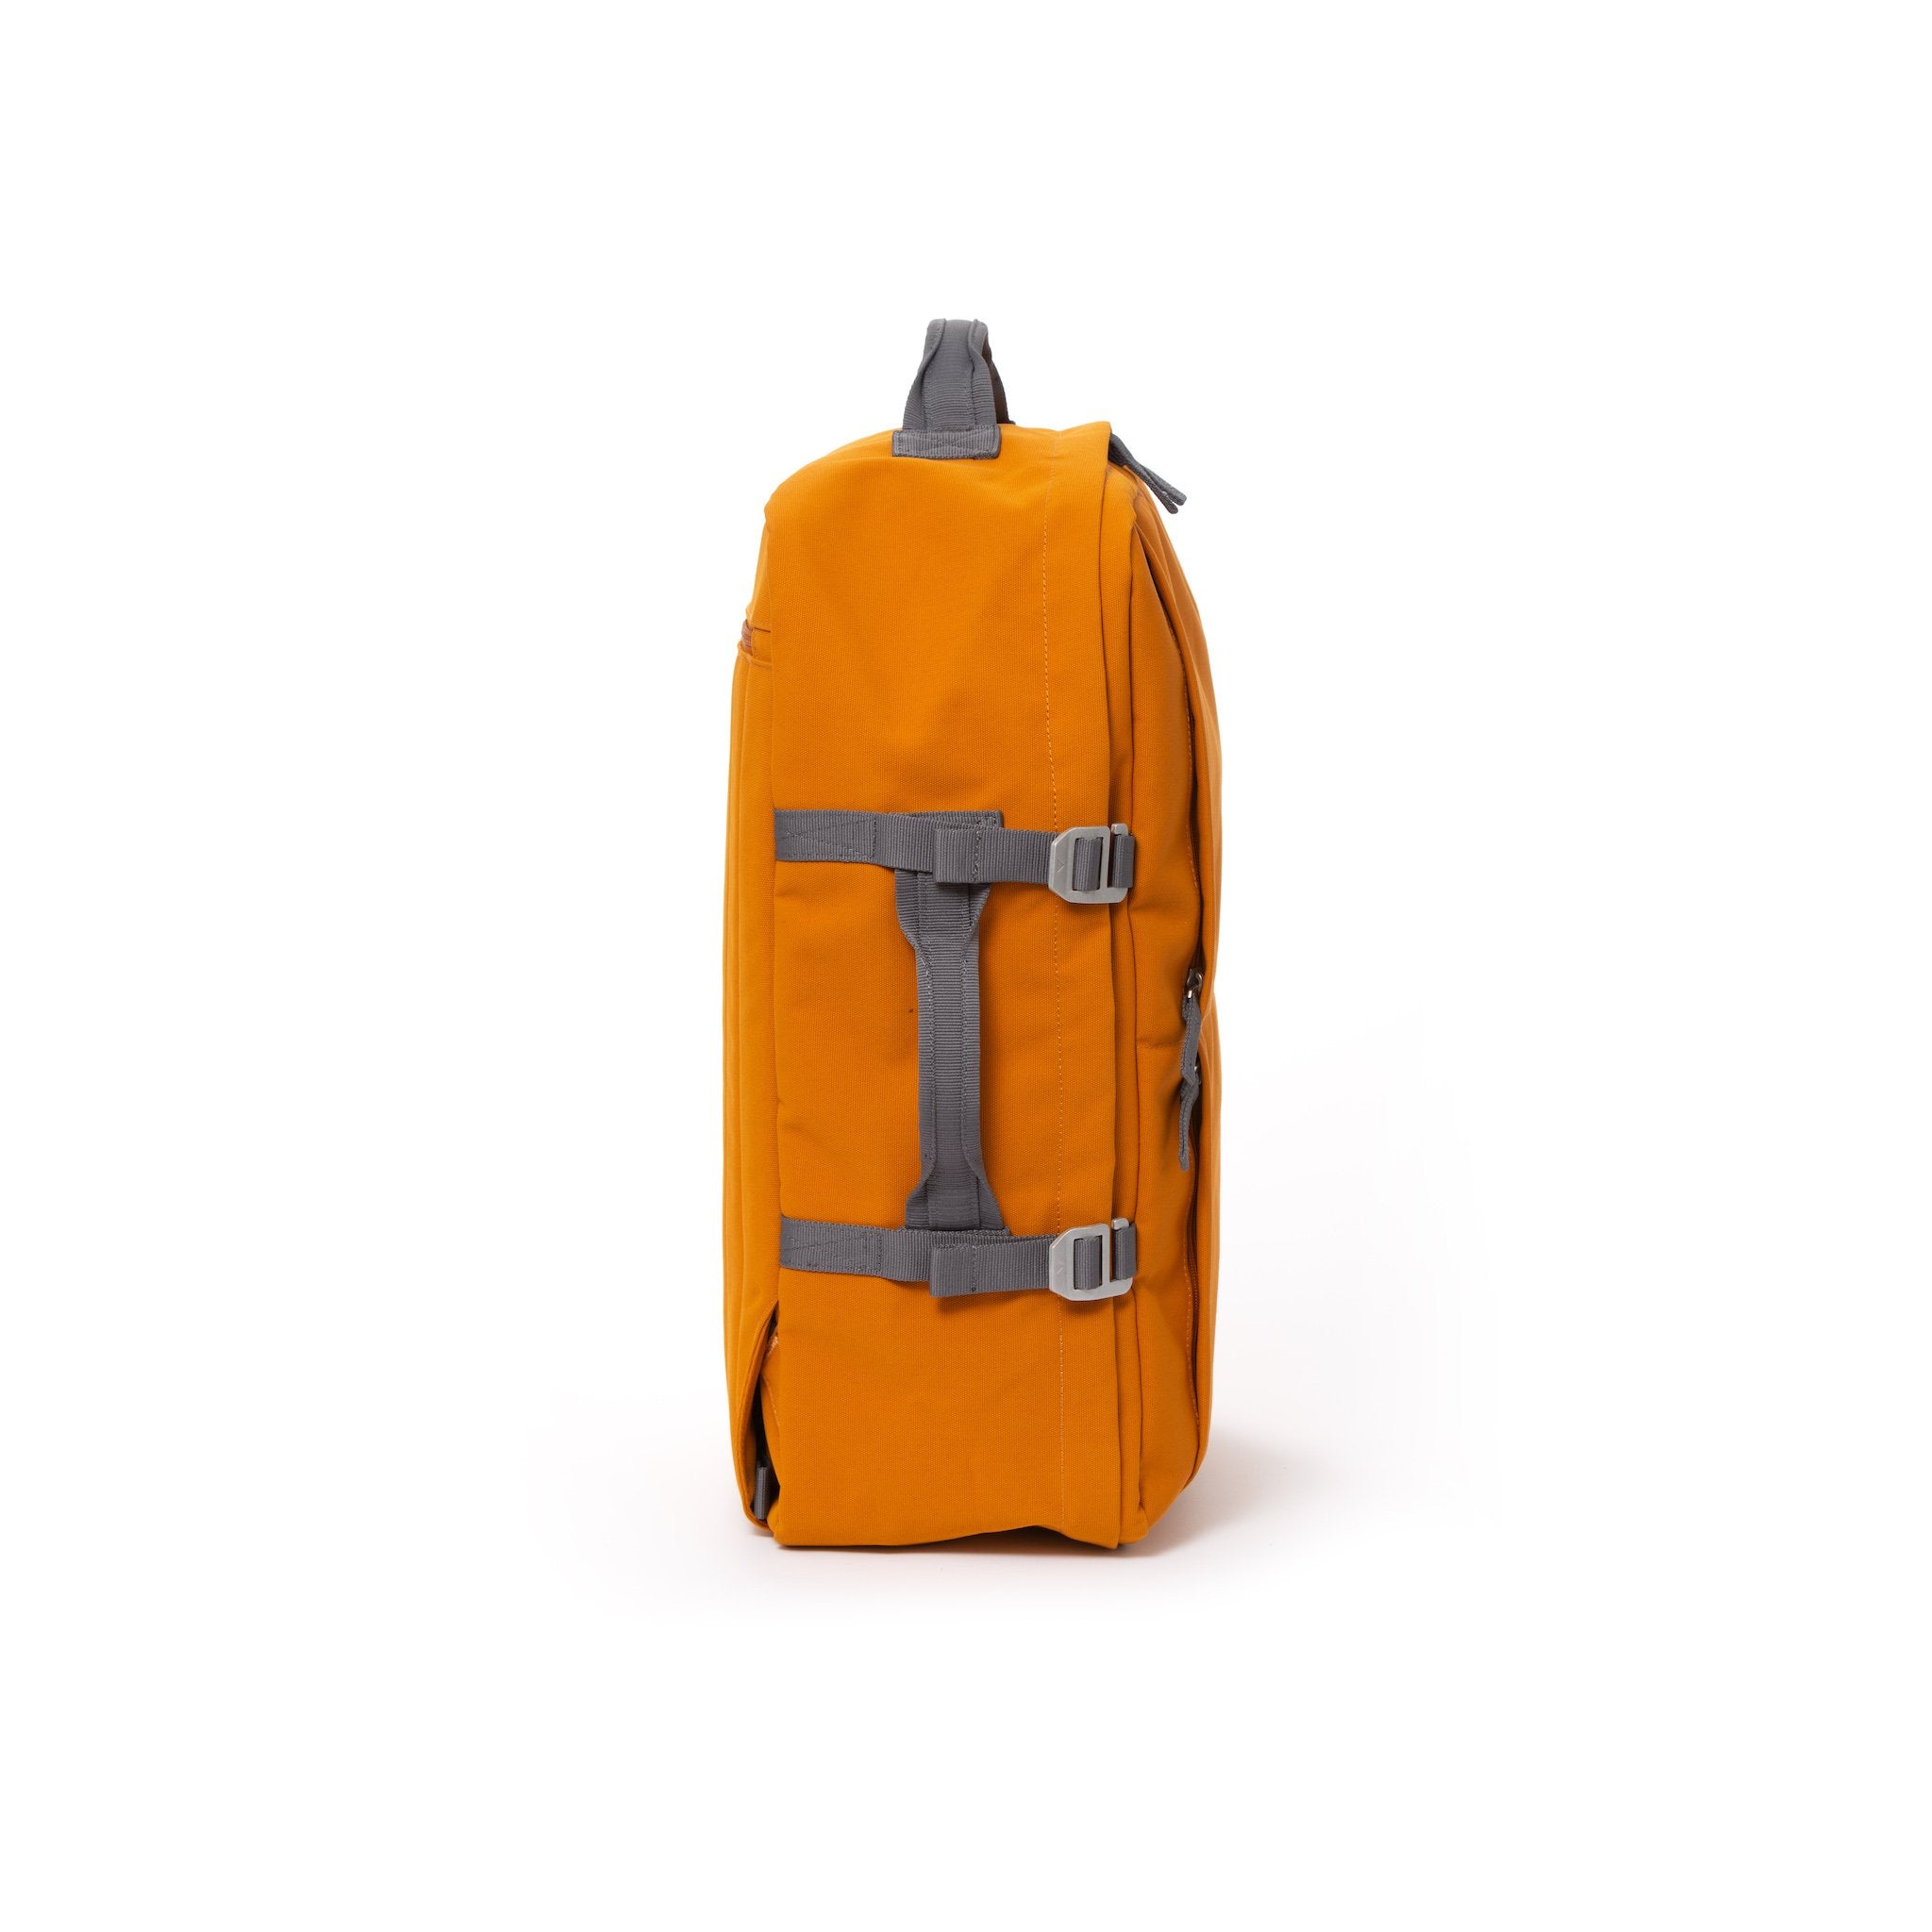 Orange recycled canvas travel backpack with compression side straps.